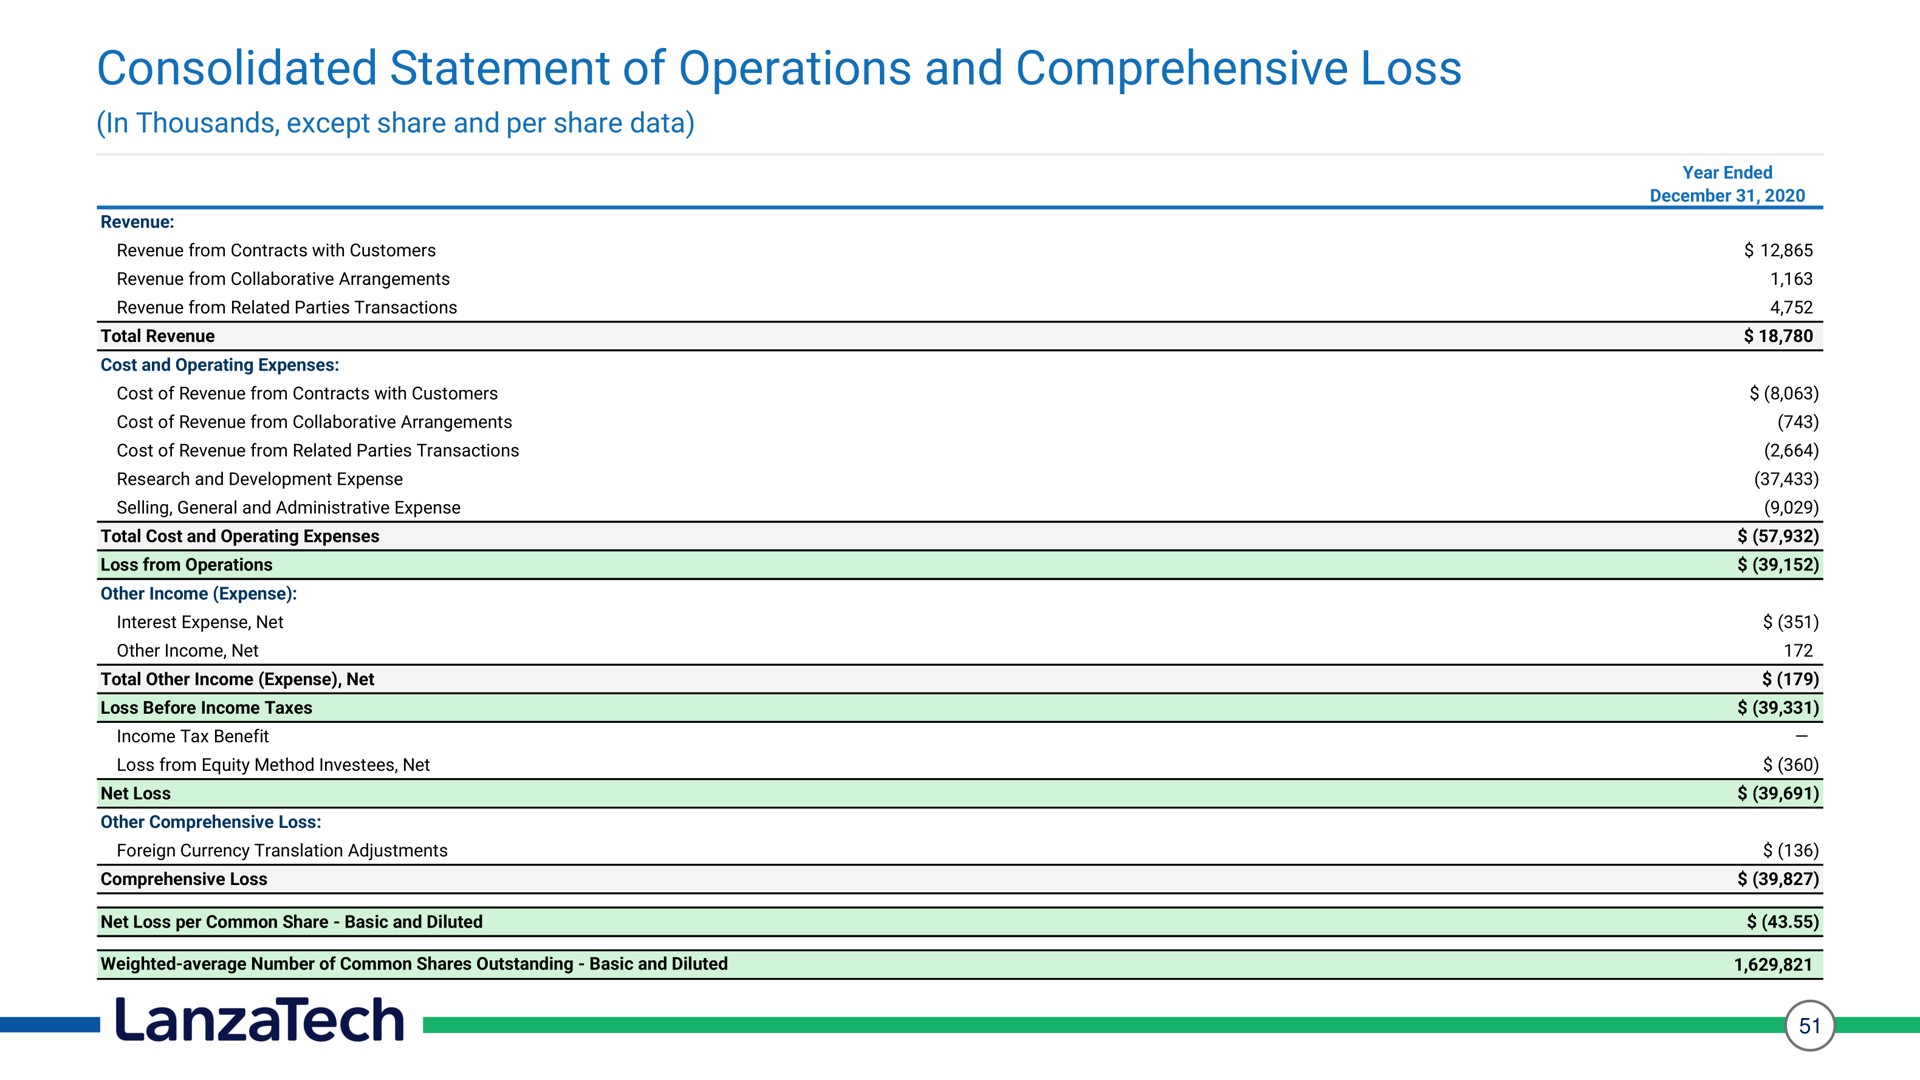 consolidated statement of operations and comprehensive loss | LanzaTech